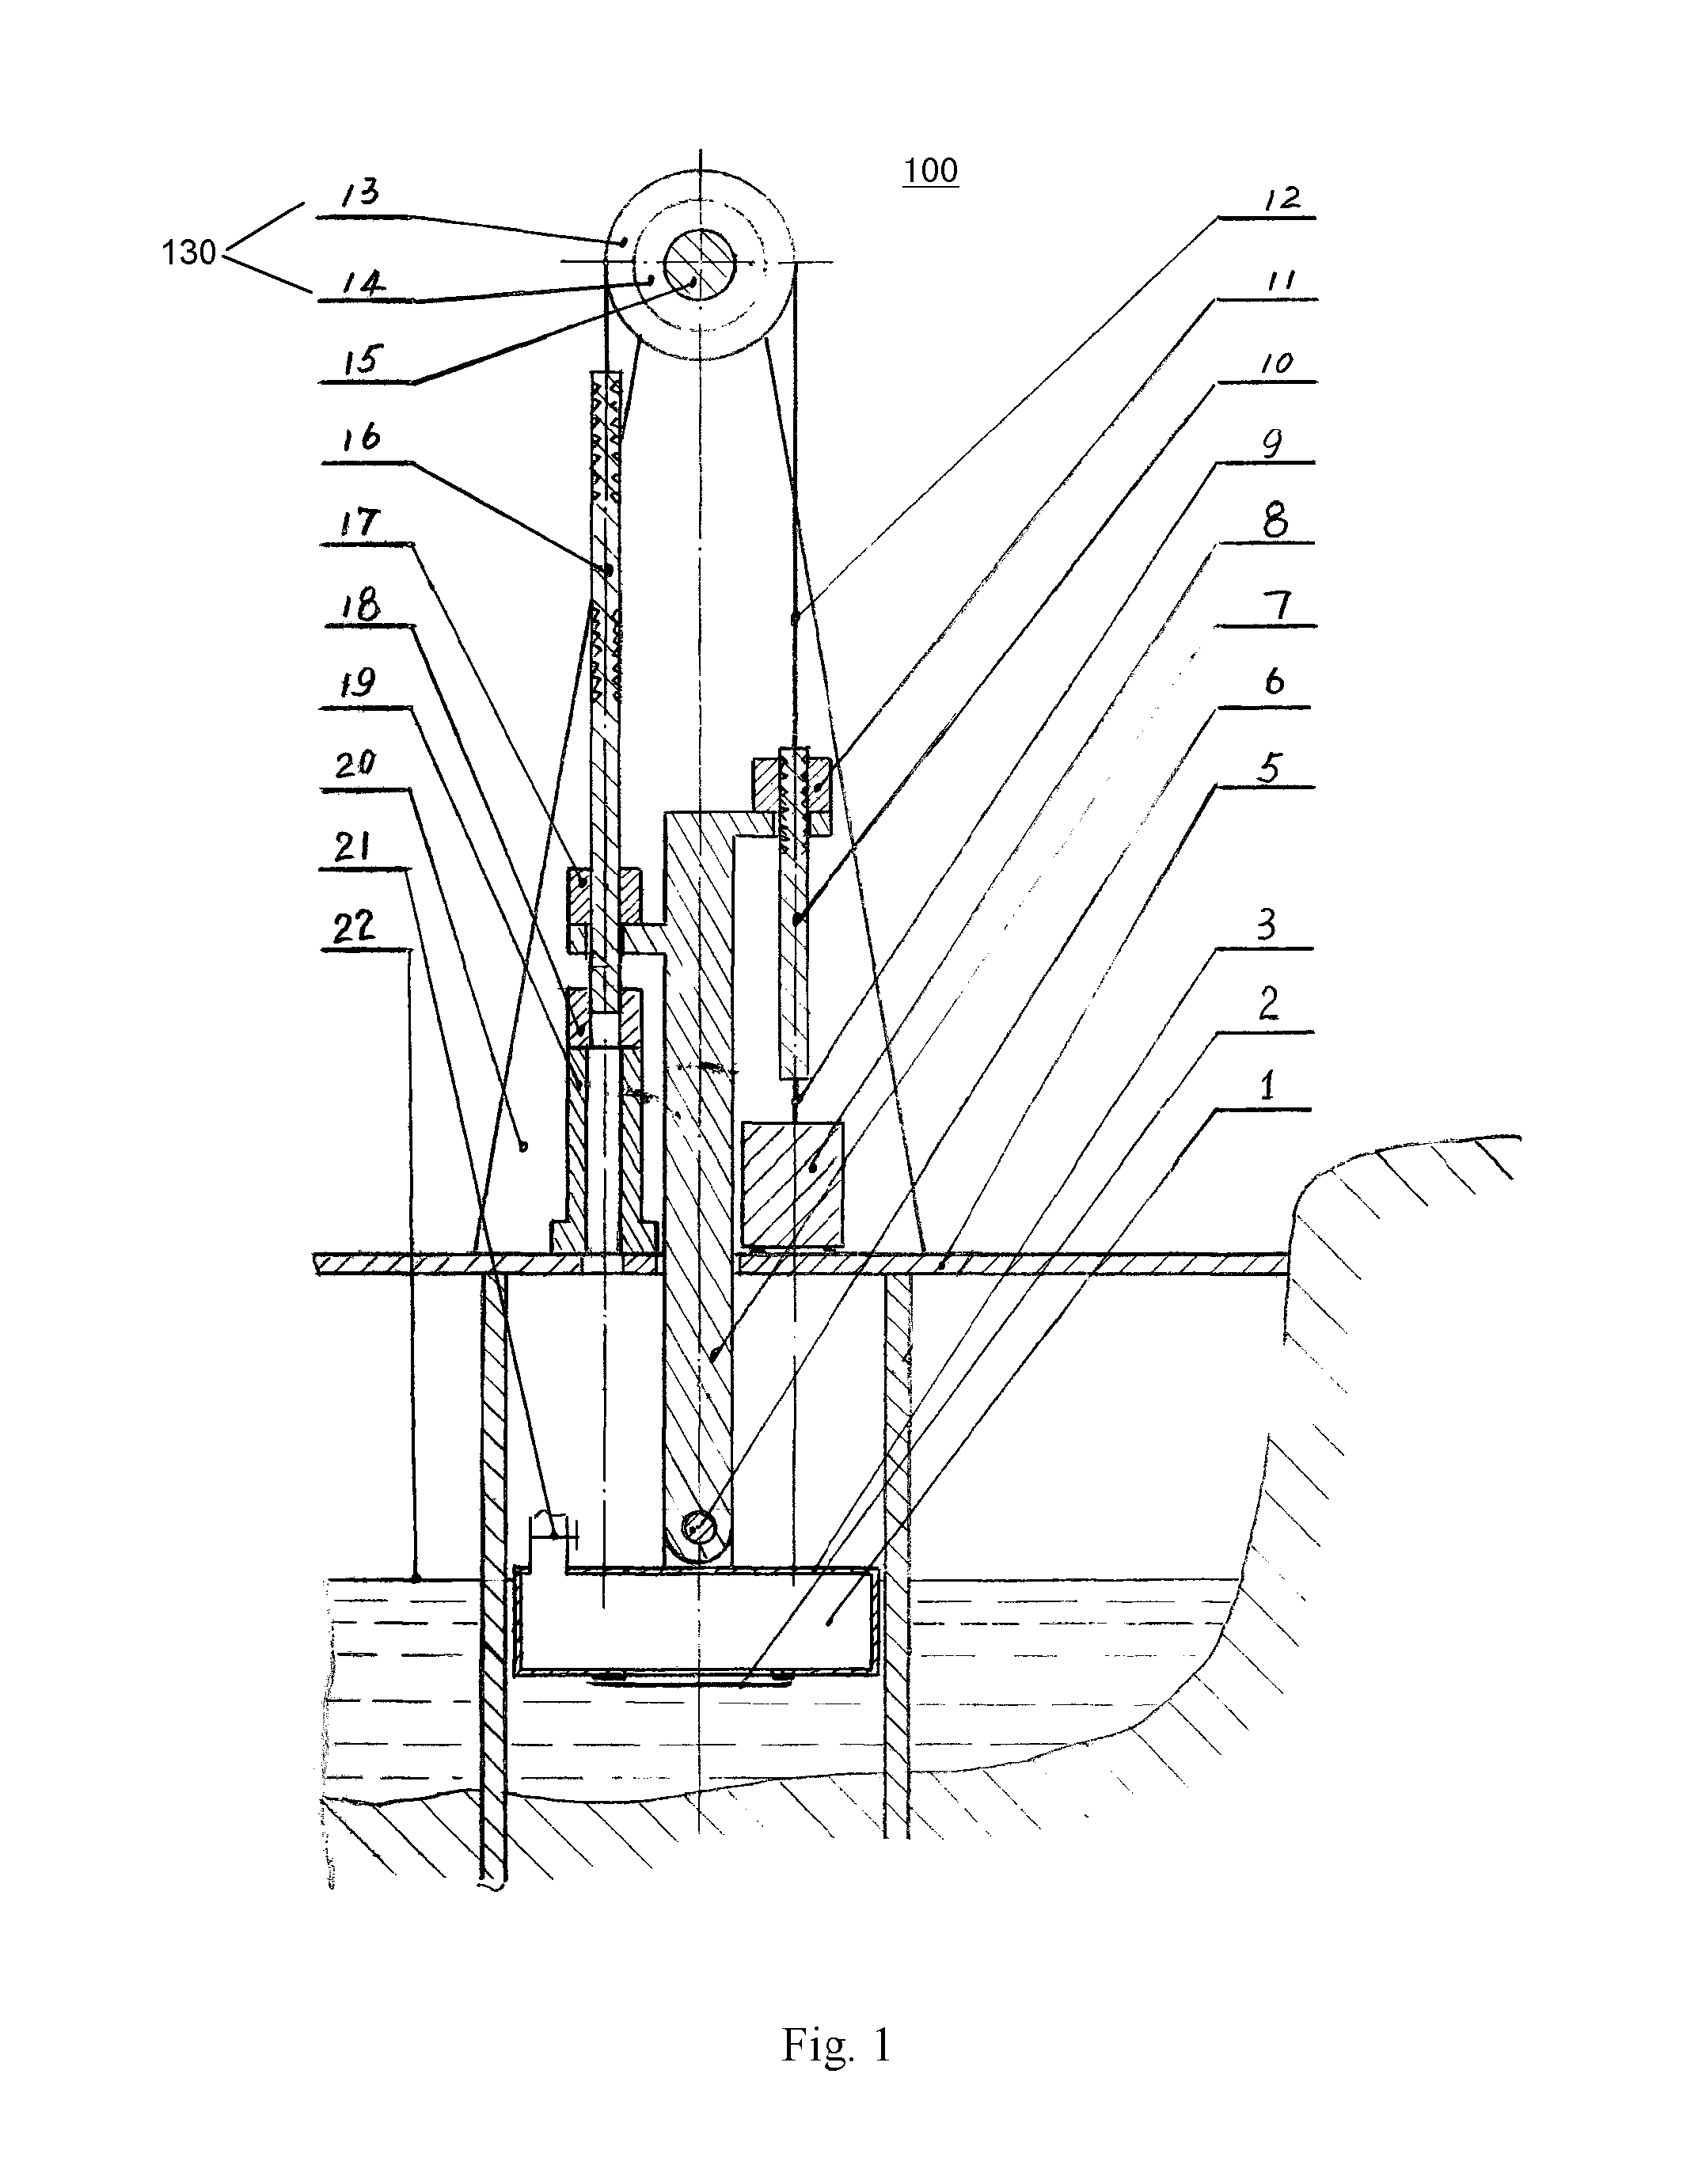 Method and system for tidal energy storage and power generation